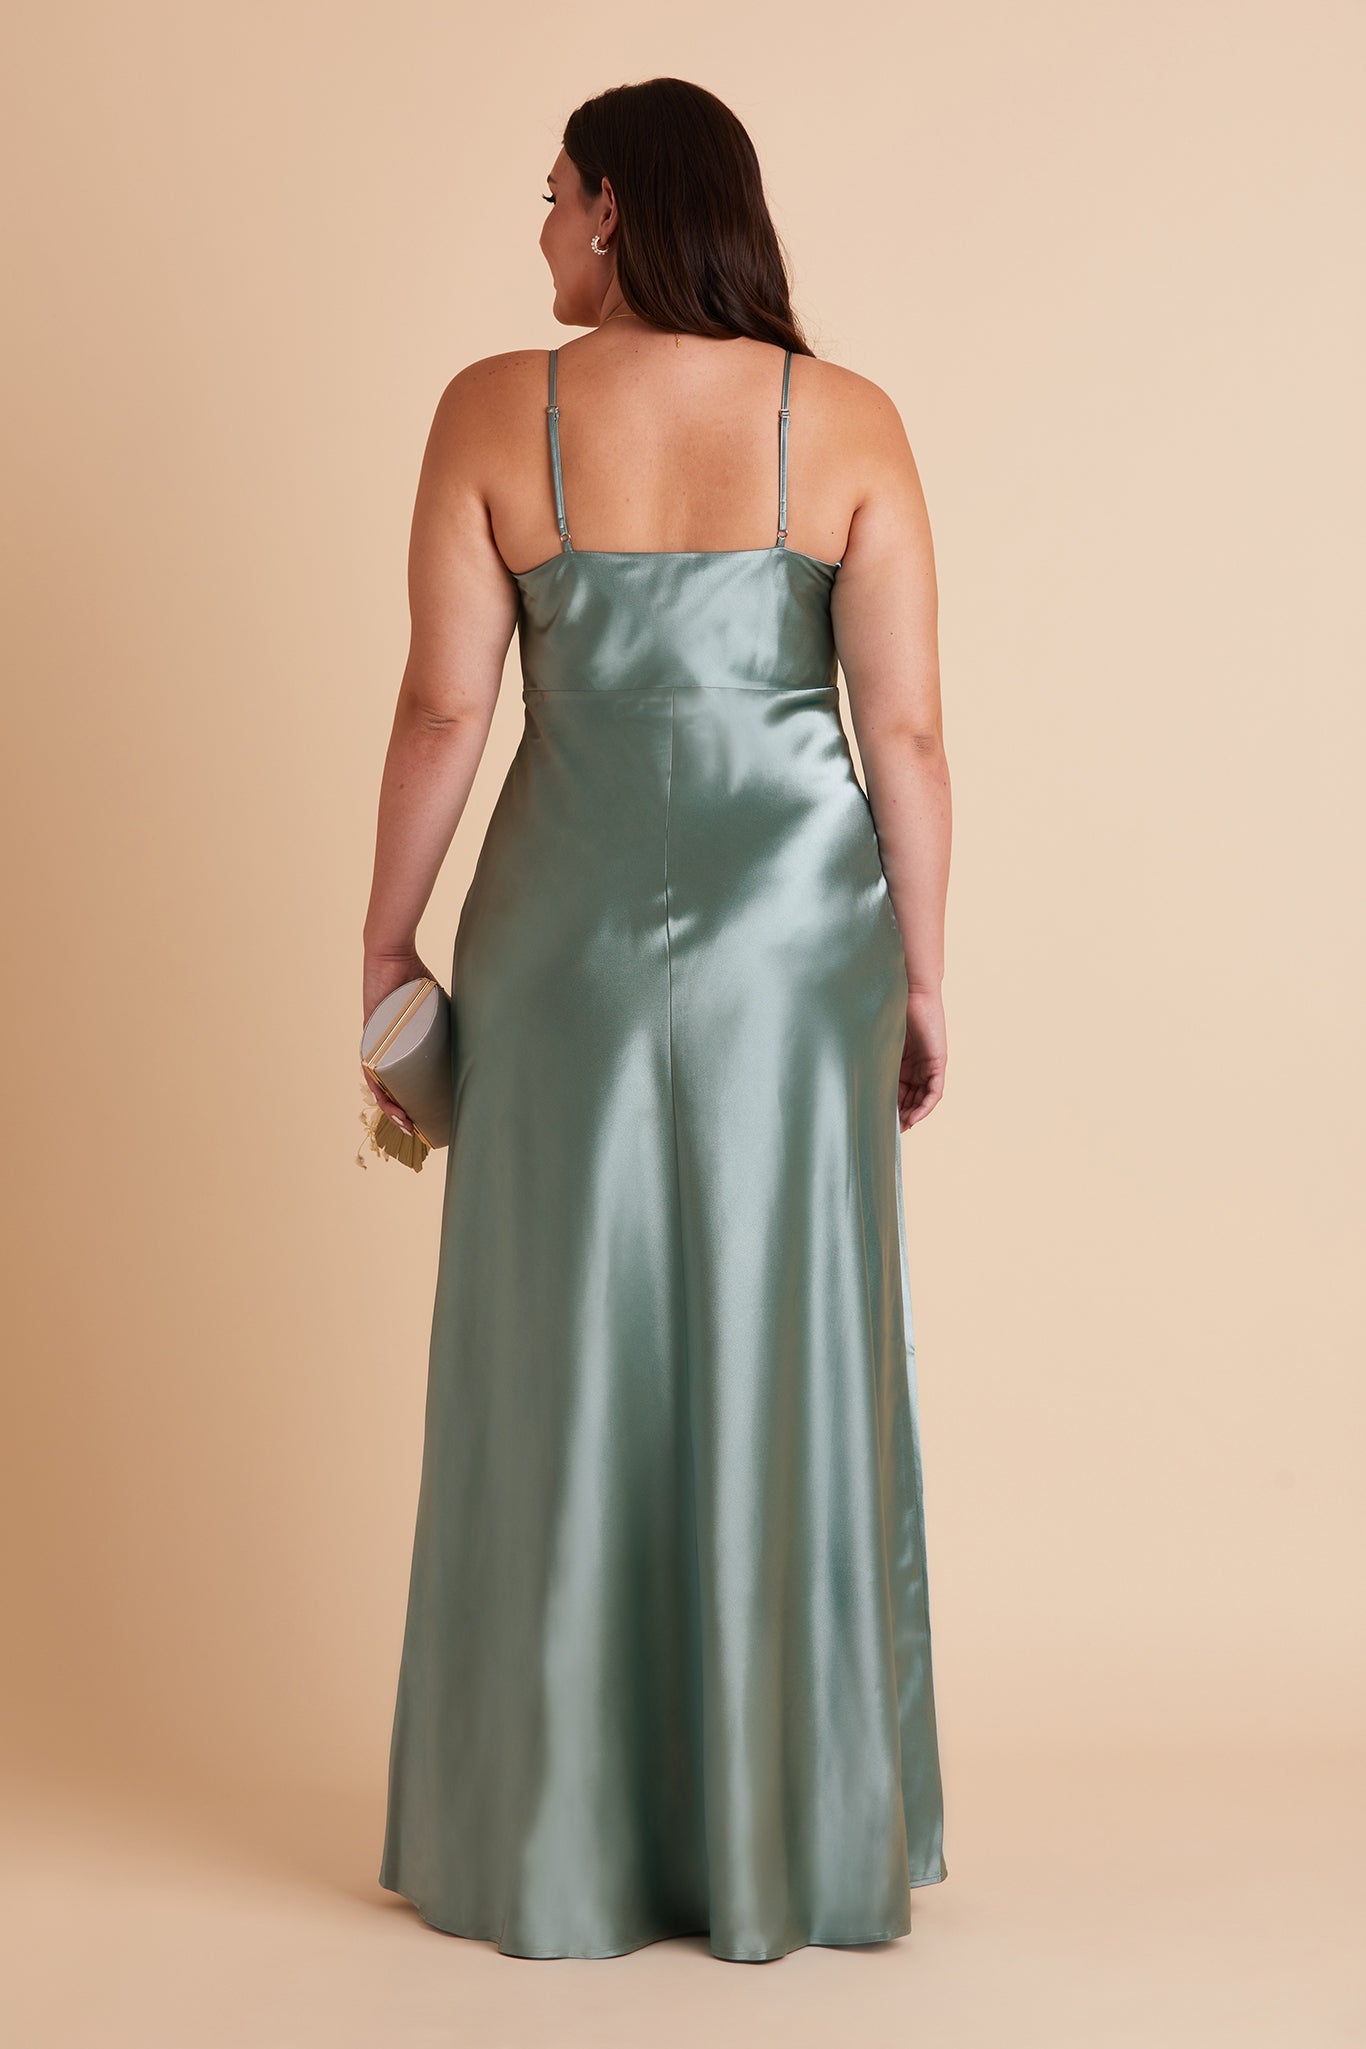 Lisa plus size bridesmaid dress with slit in sea glass satin by Birdy Grey, back view